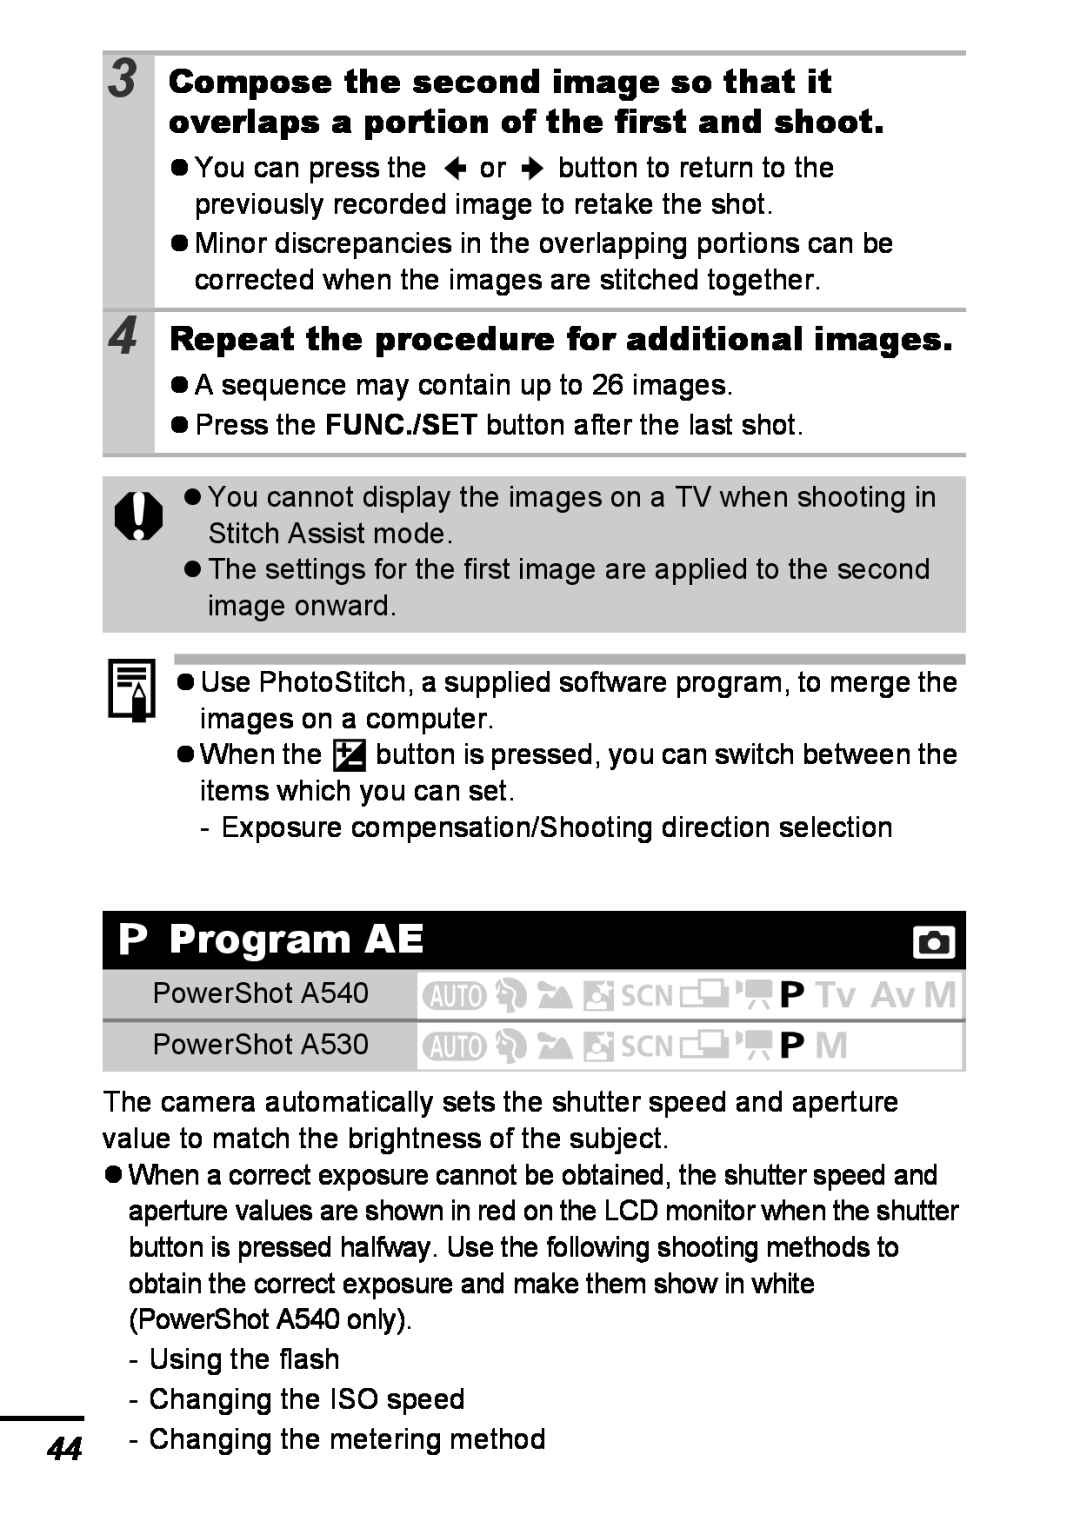 Canon A540 appendix Program AE, Repeat the procedure for additional images 